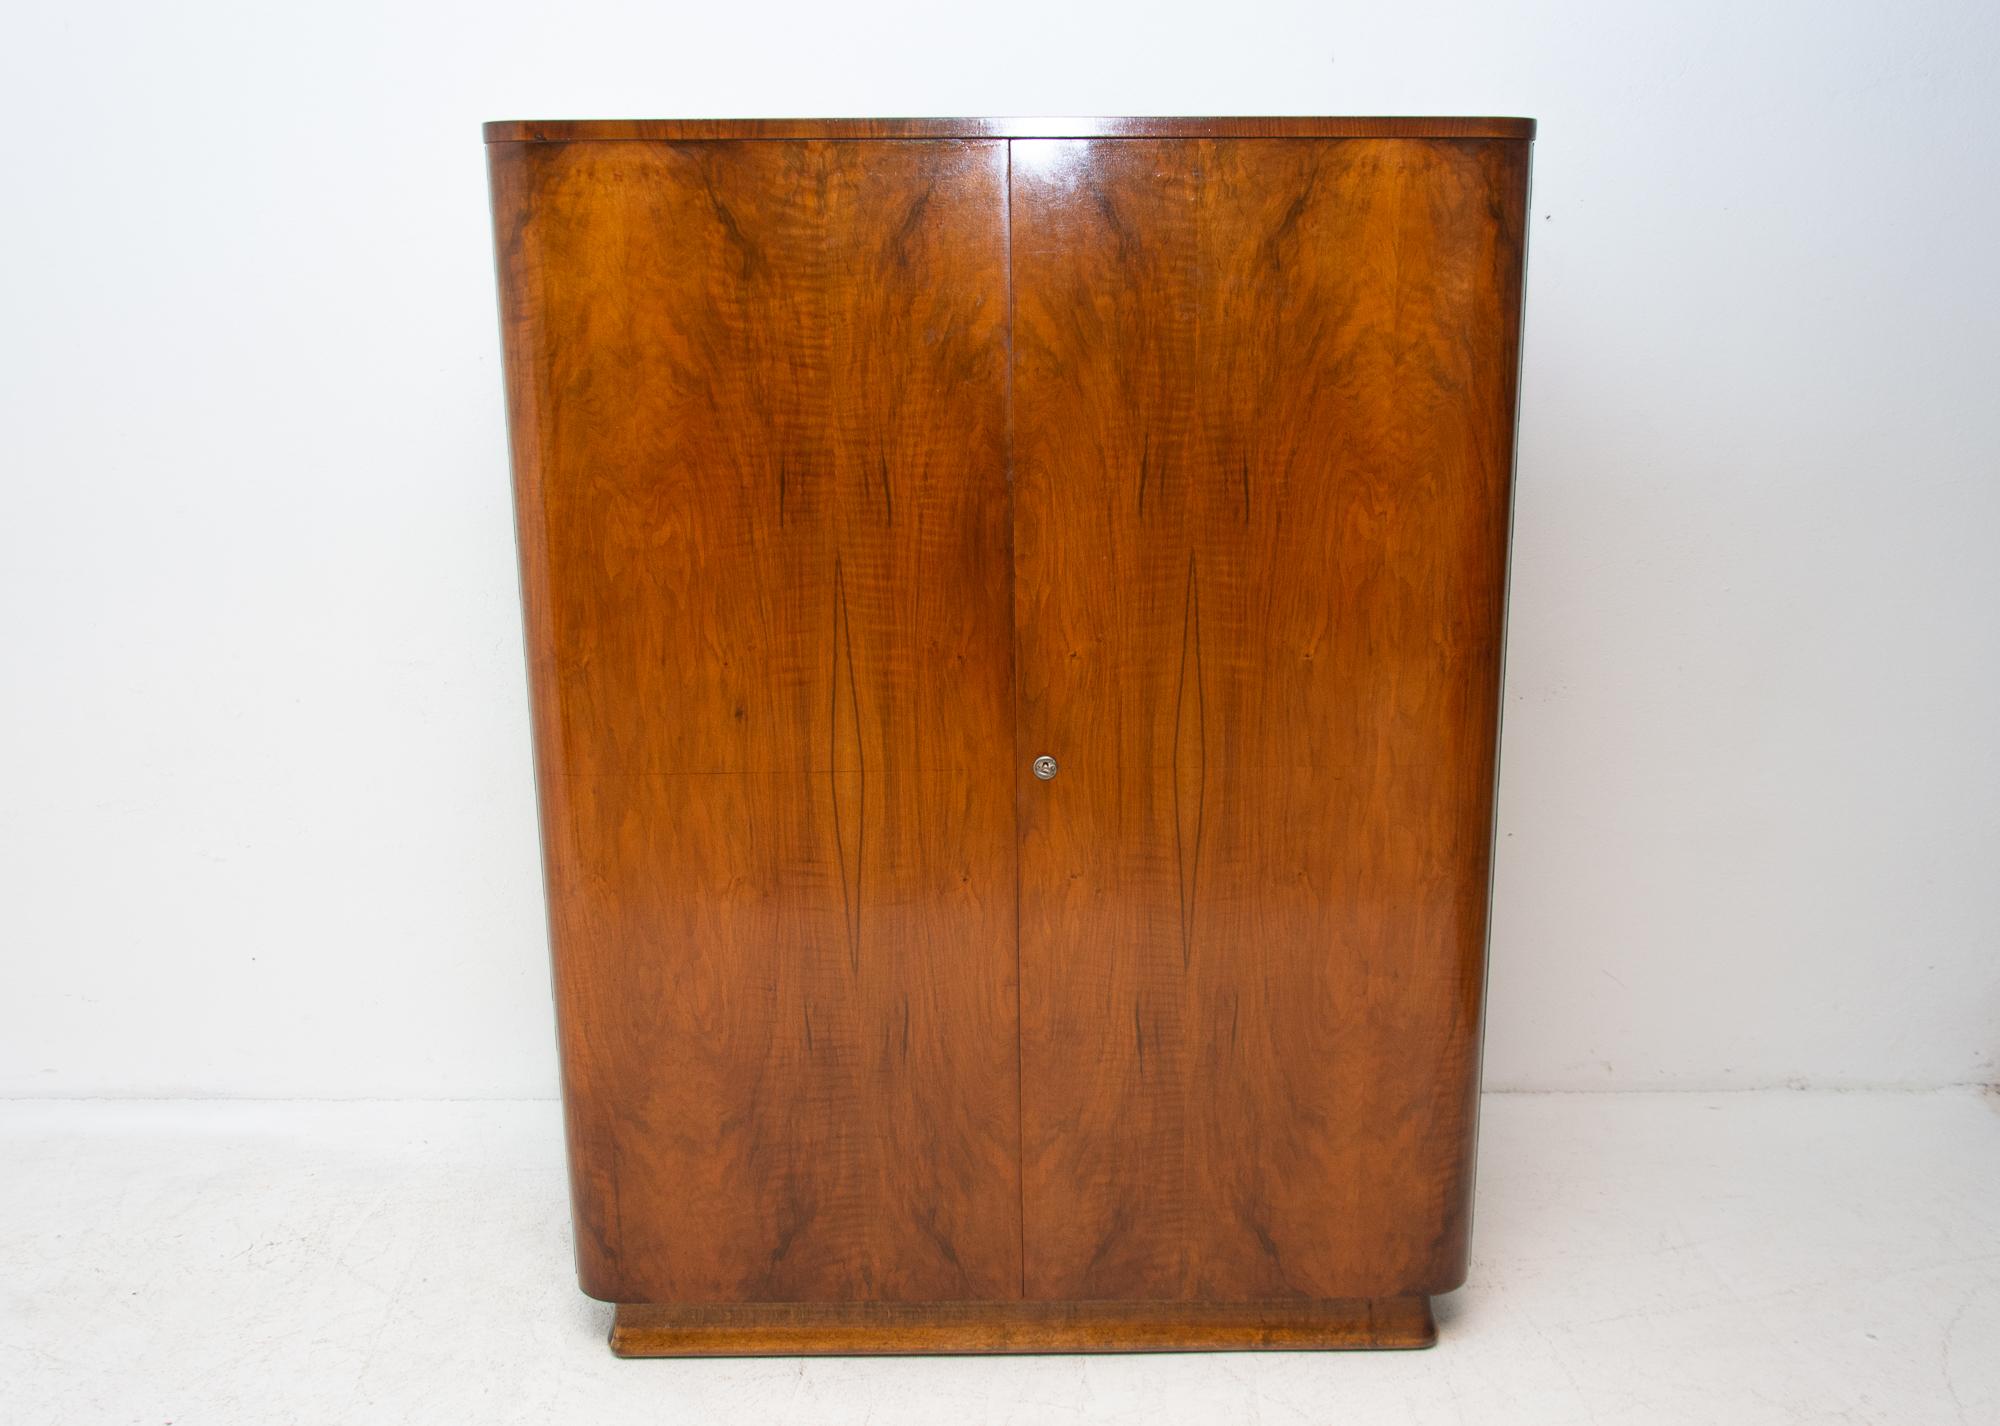 Vintage Czechoslovak modernist wardrobe, made in Czechoslovakia in the 1950s. It is made of walnut wood and plywood. This item is in very good vintage condition, with only slight signs of age and using, a small chip of veneer on the back of the